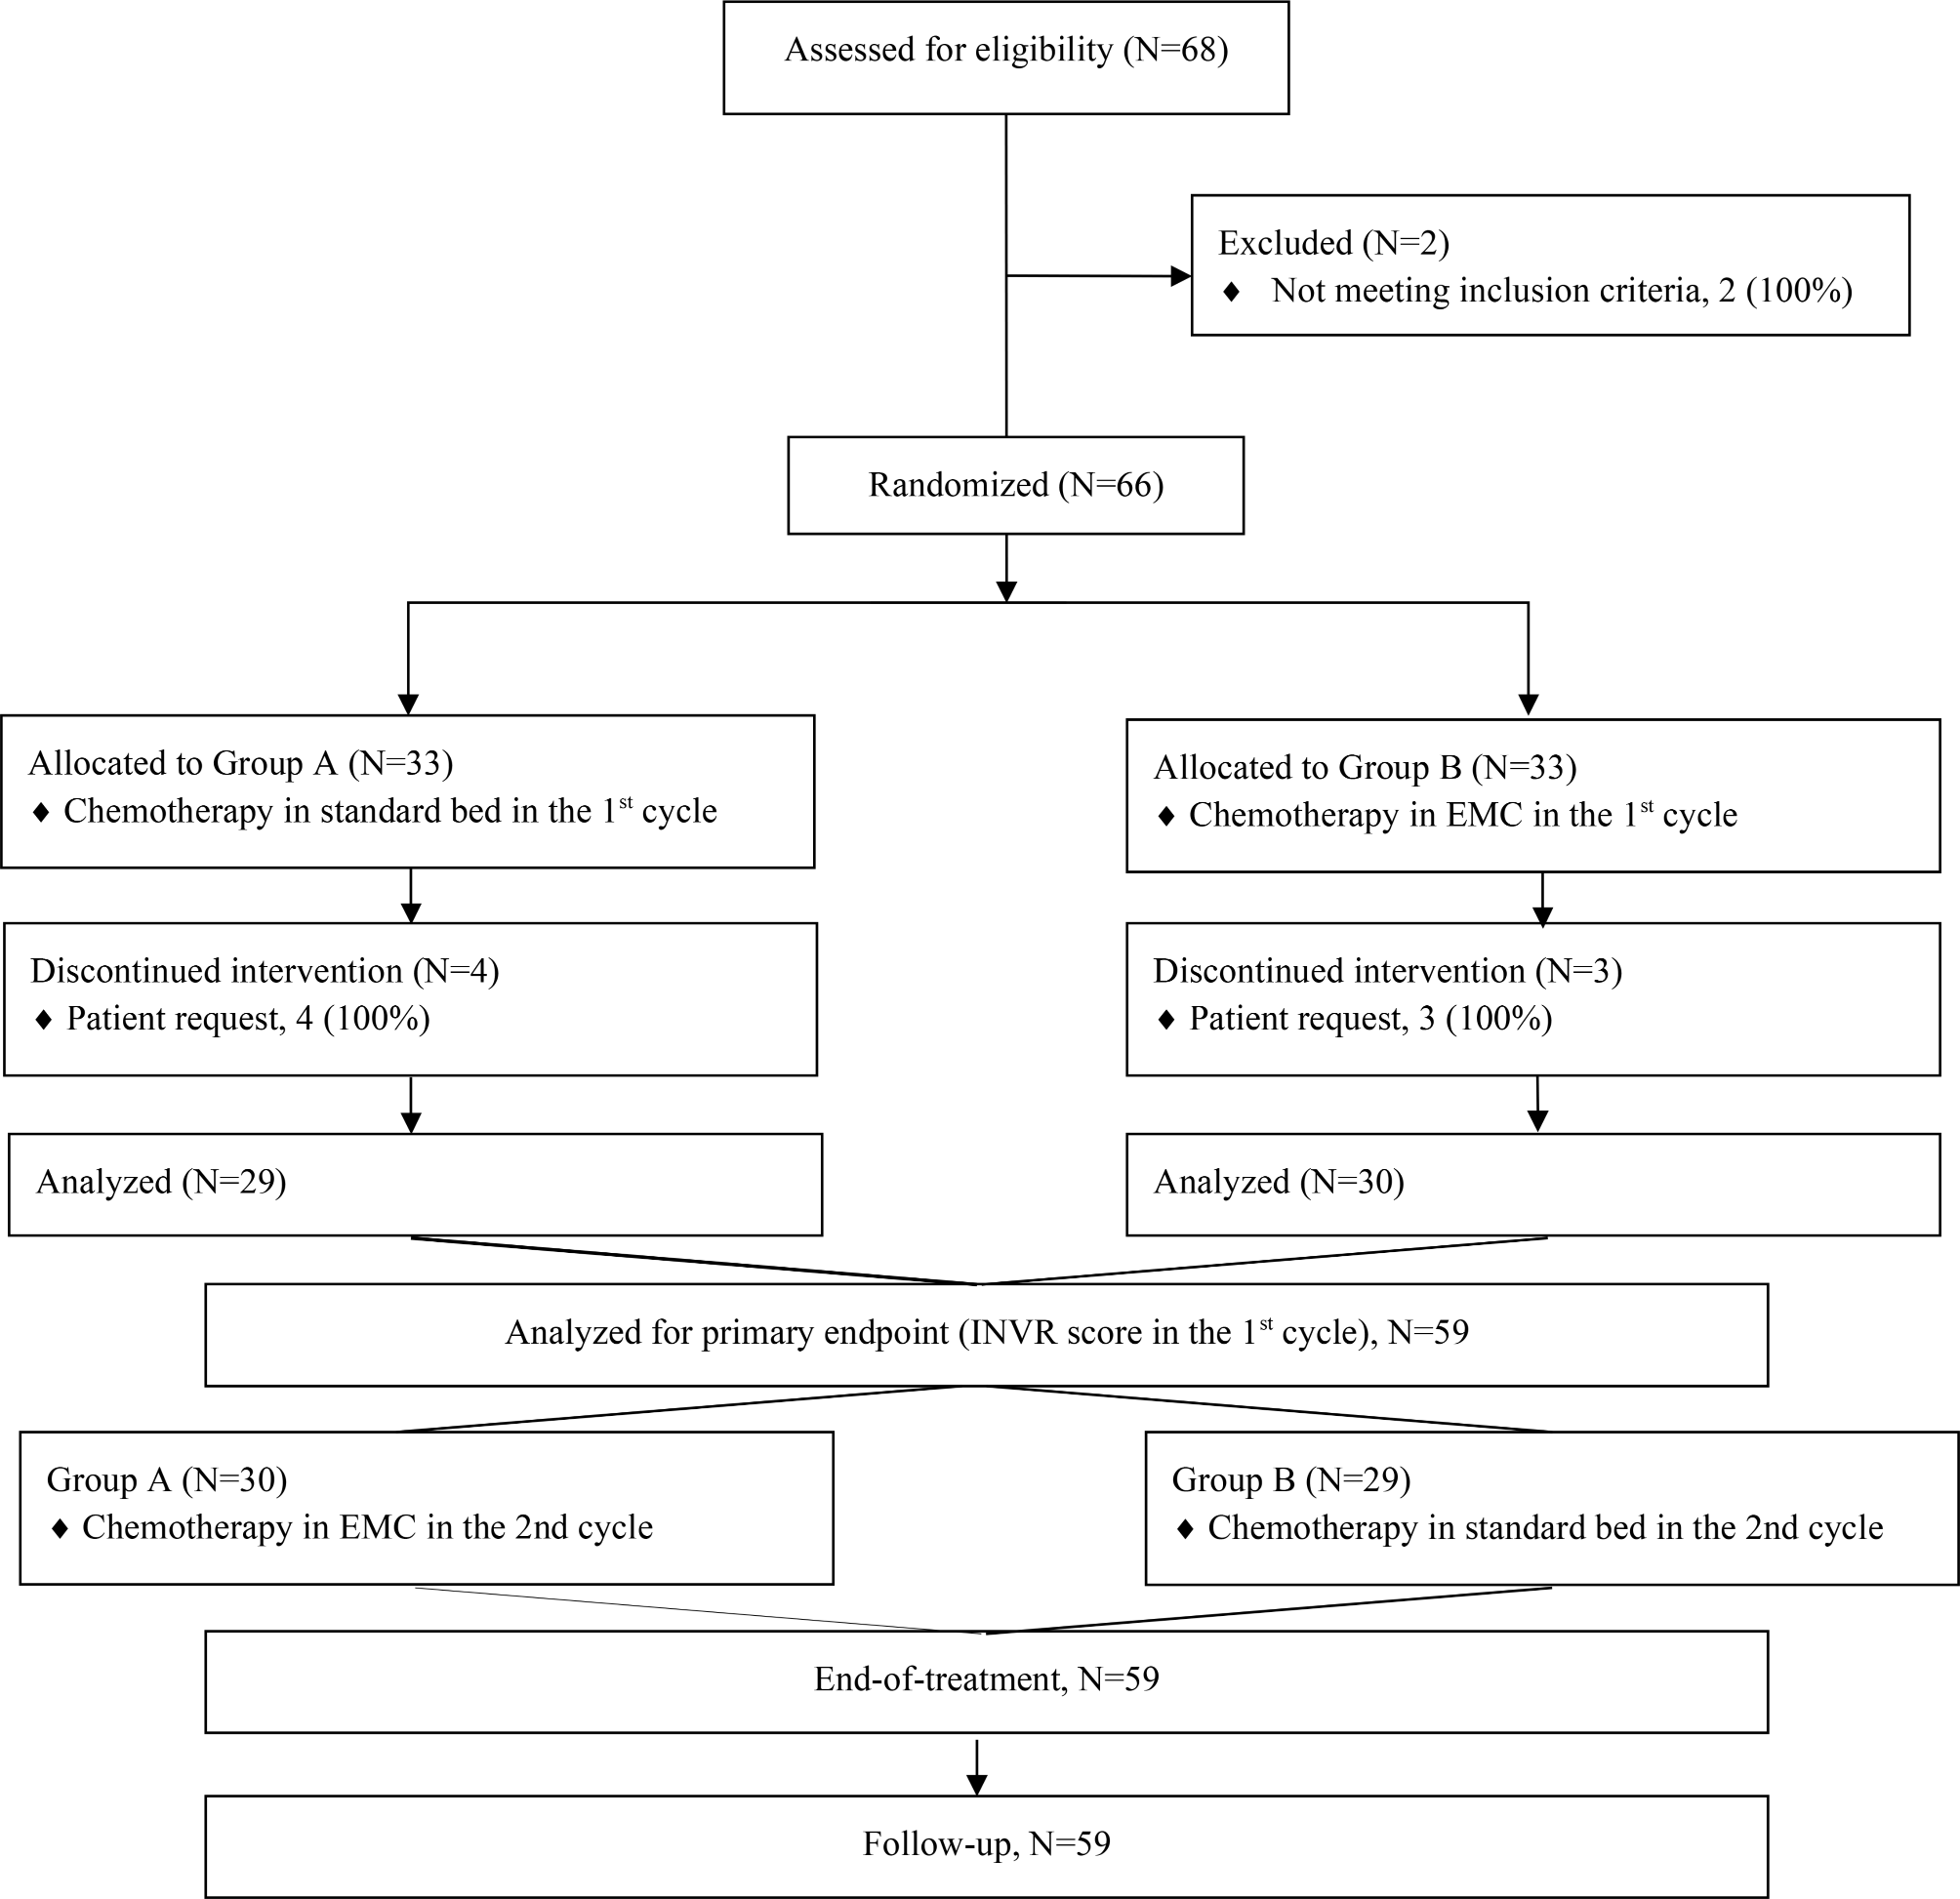 The clinical effect of an electric massage chair on chemotherapy-induced nausea and vomiting in cancer patients: randomized phase II cross-over trial